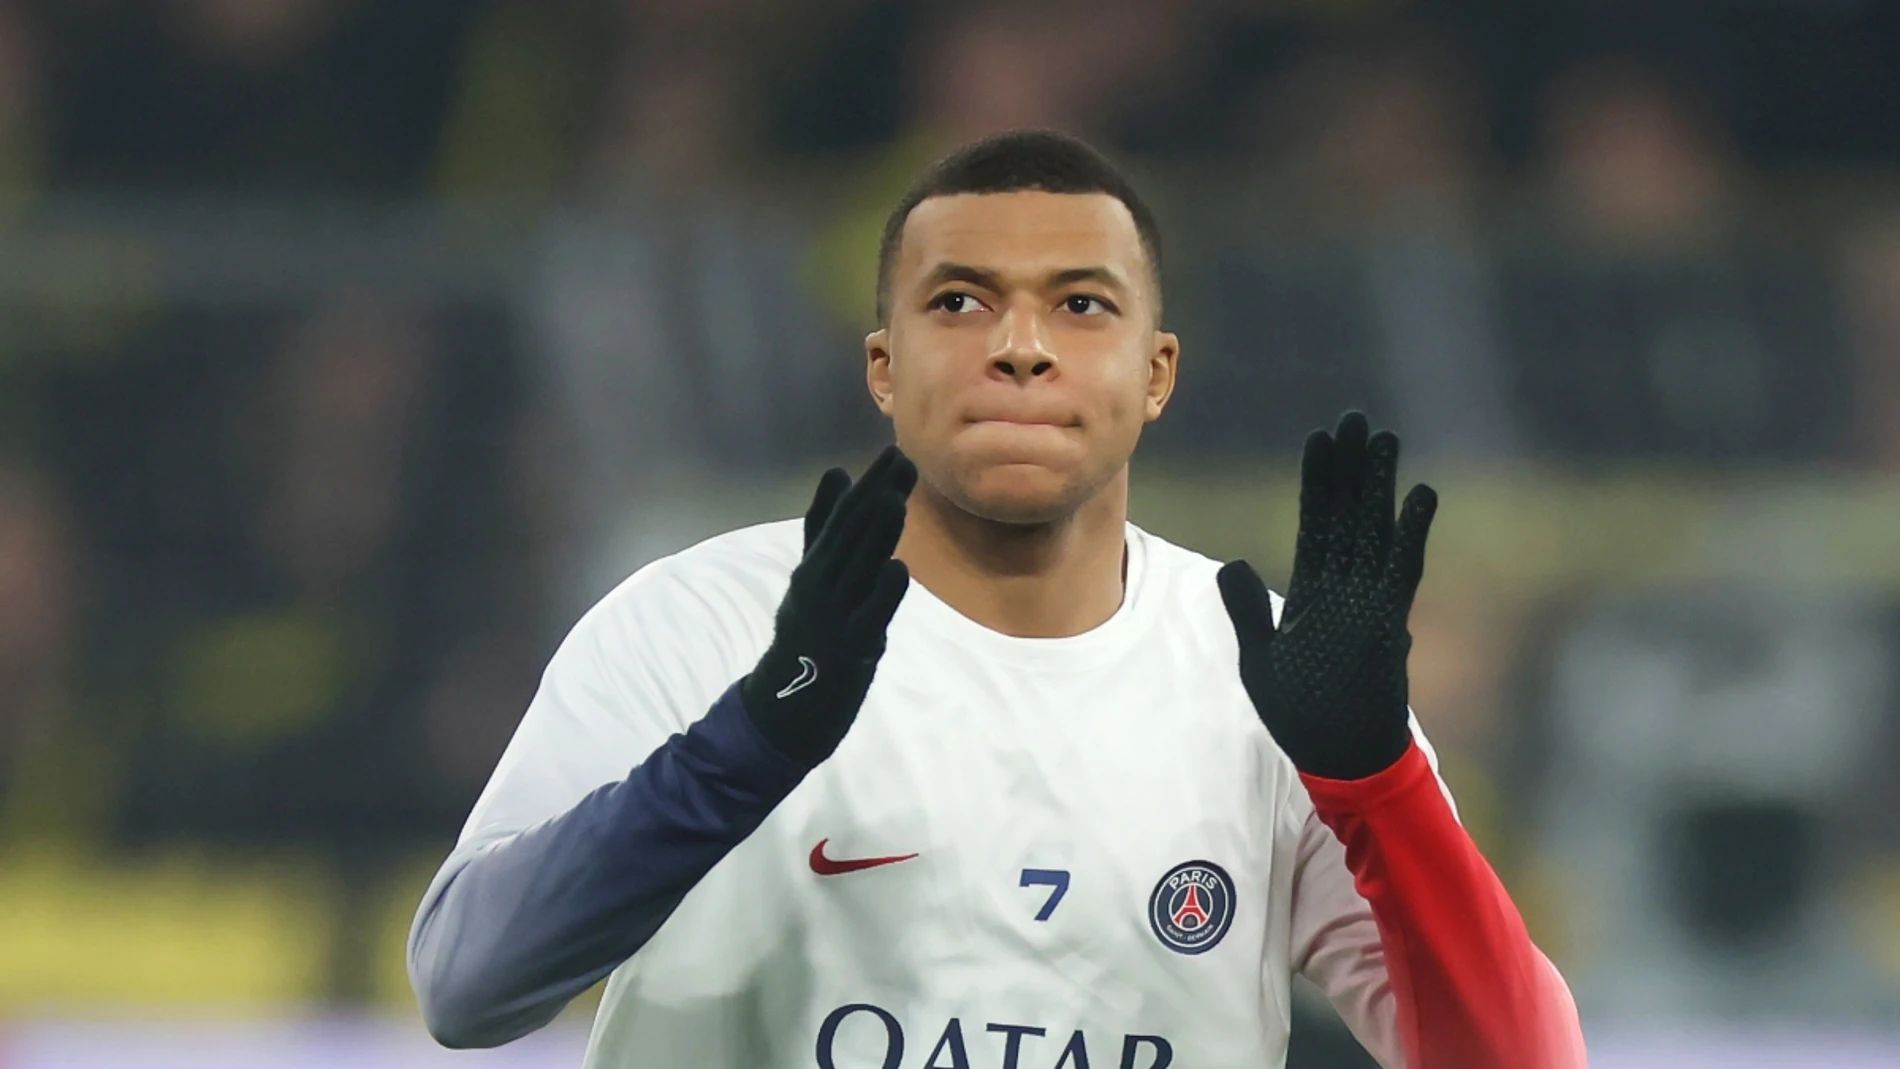 Real Madrid have date in mind for Kylian Mbappe’s official presentation